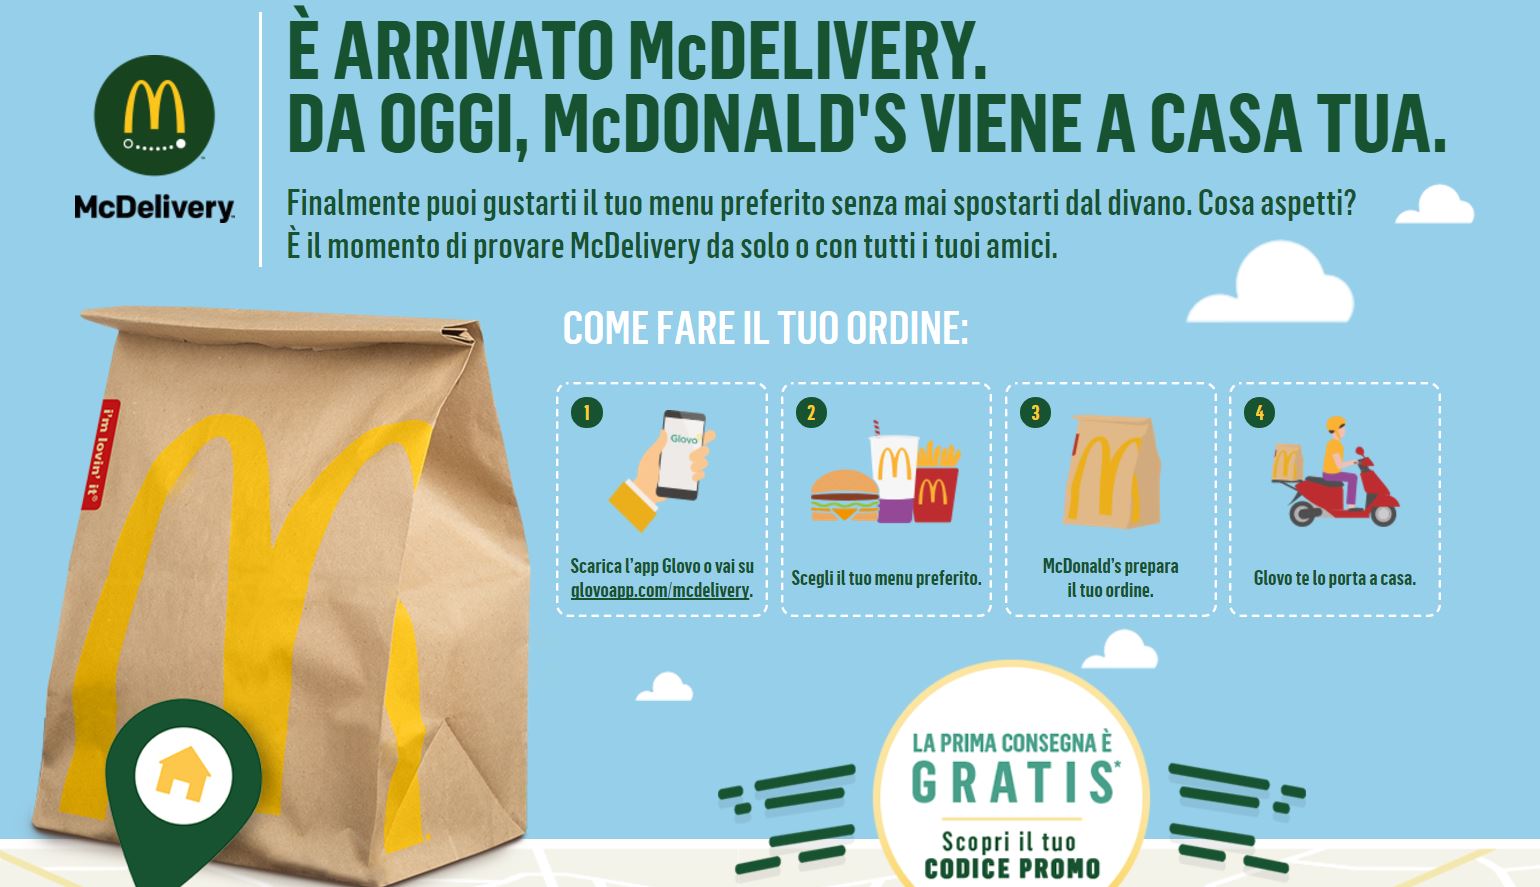 MCDELIVERY. MCDONALD'S menu. MCDELIVERY PH. MCDELIVERY' S Travel. Духи макдональдс